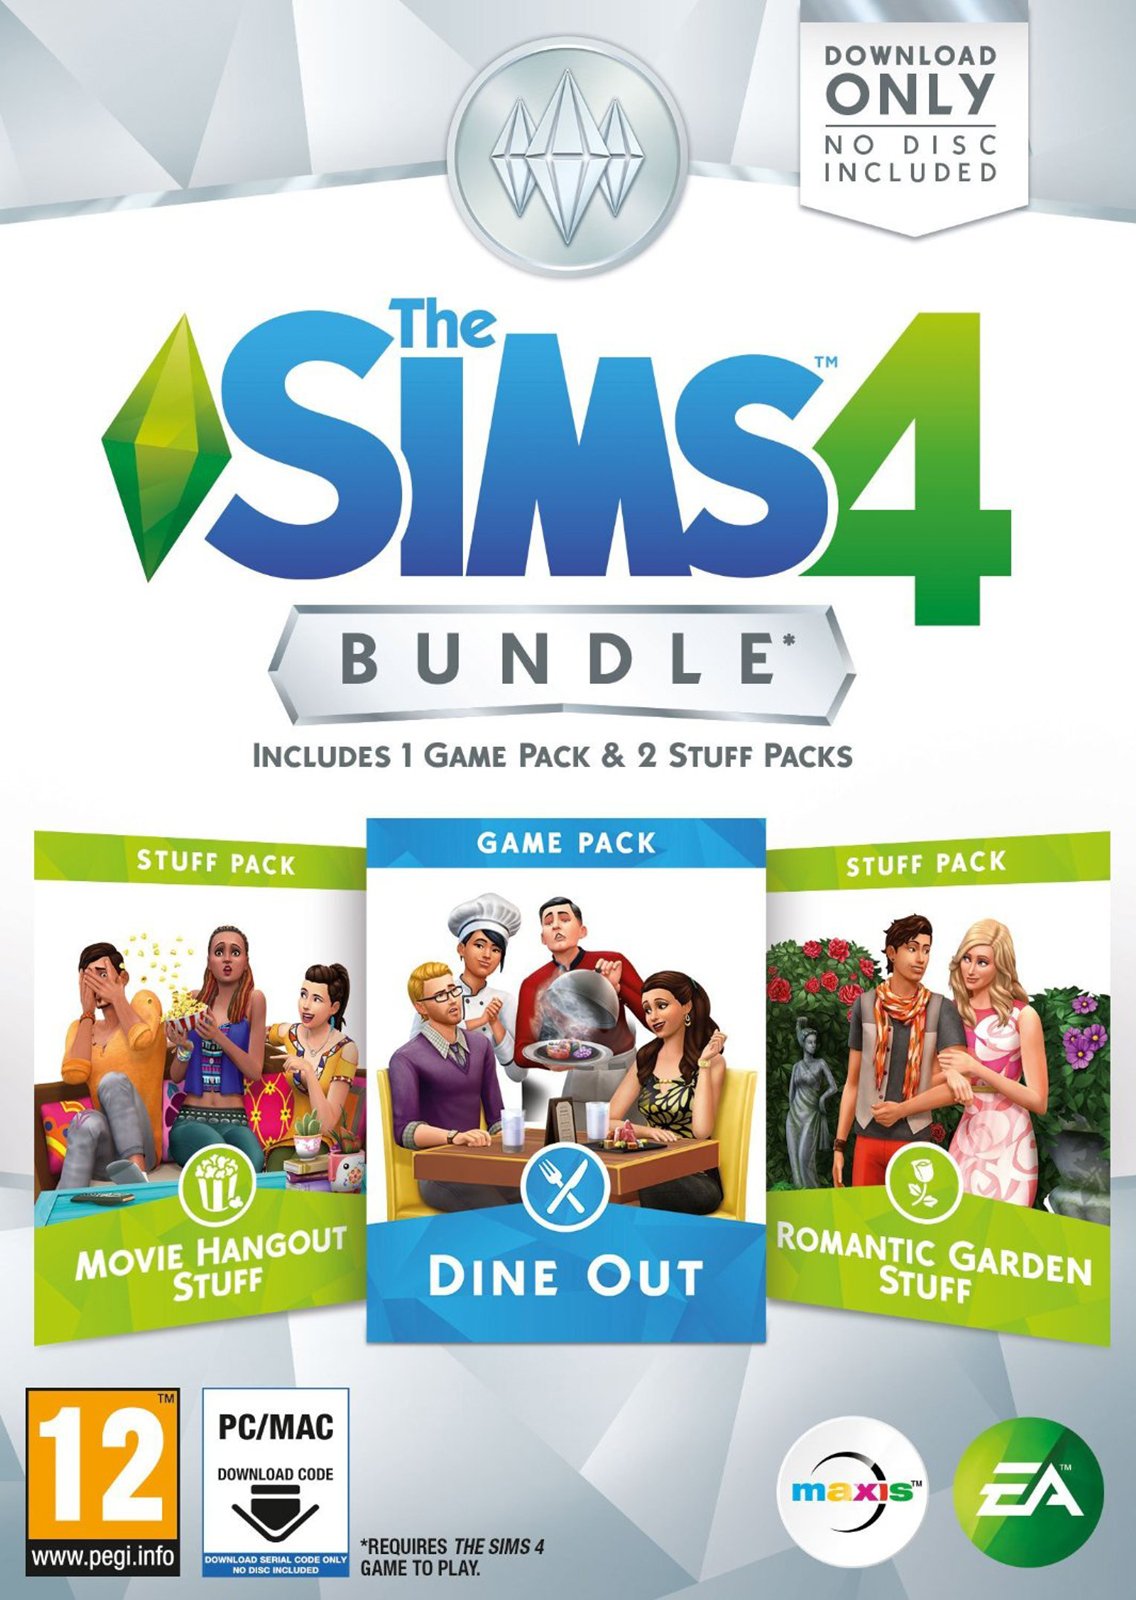 The Sims 4 Bundle Pack 5 review